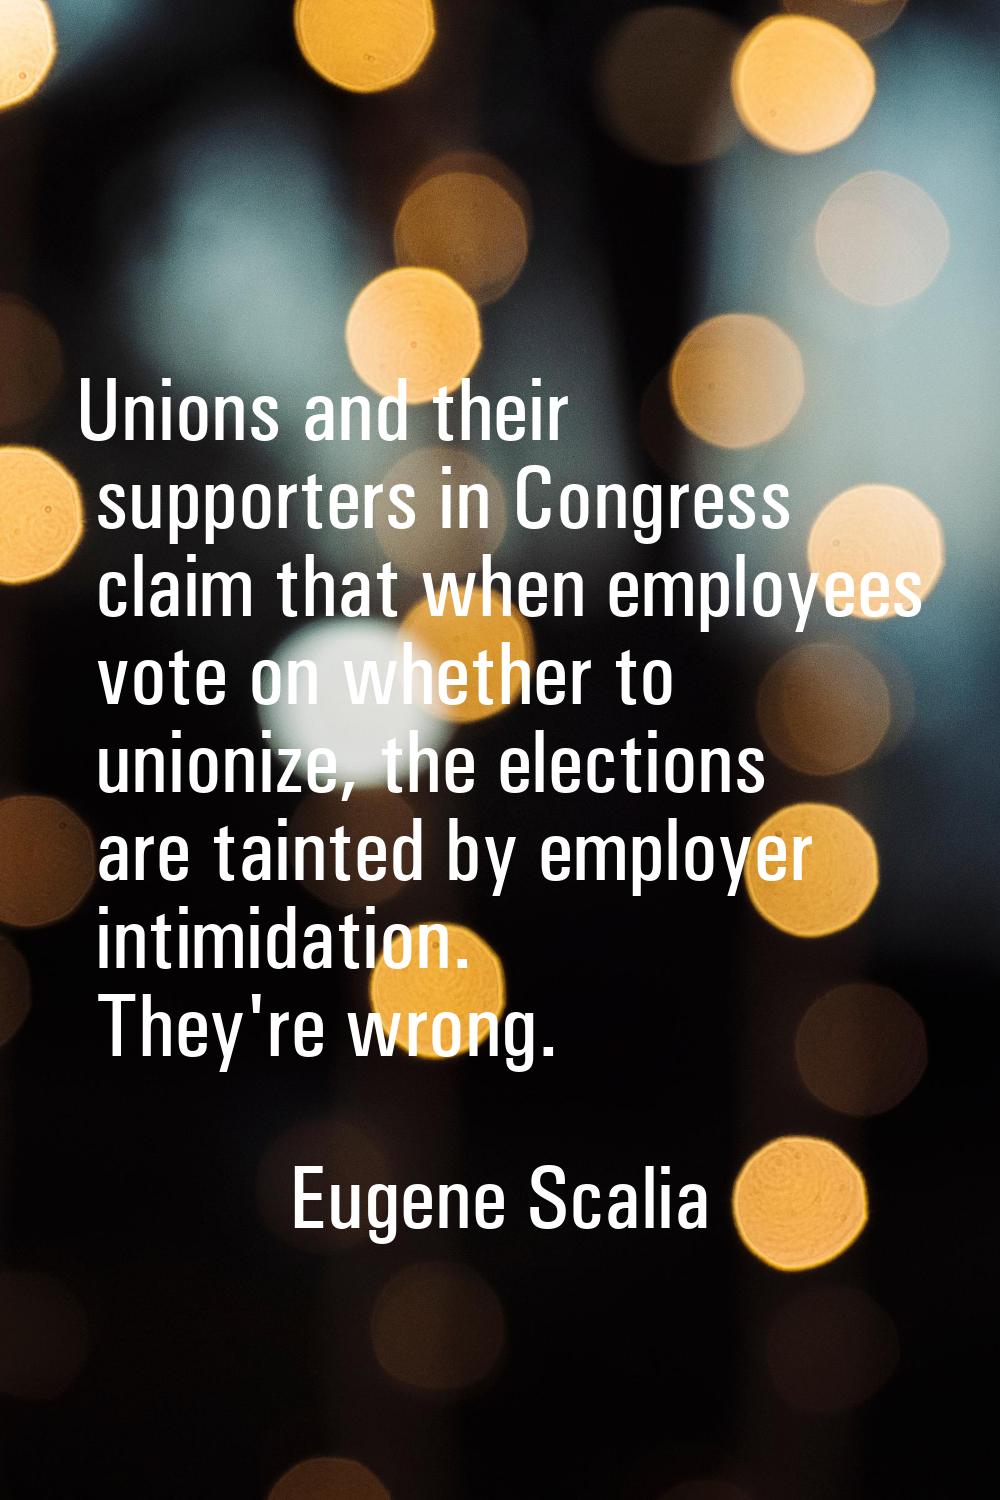 Unions and their supporters in Congress claim that when employees vote on whether to unionize, the 